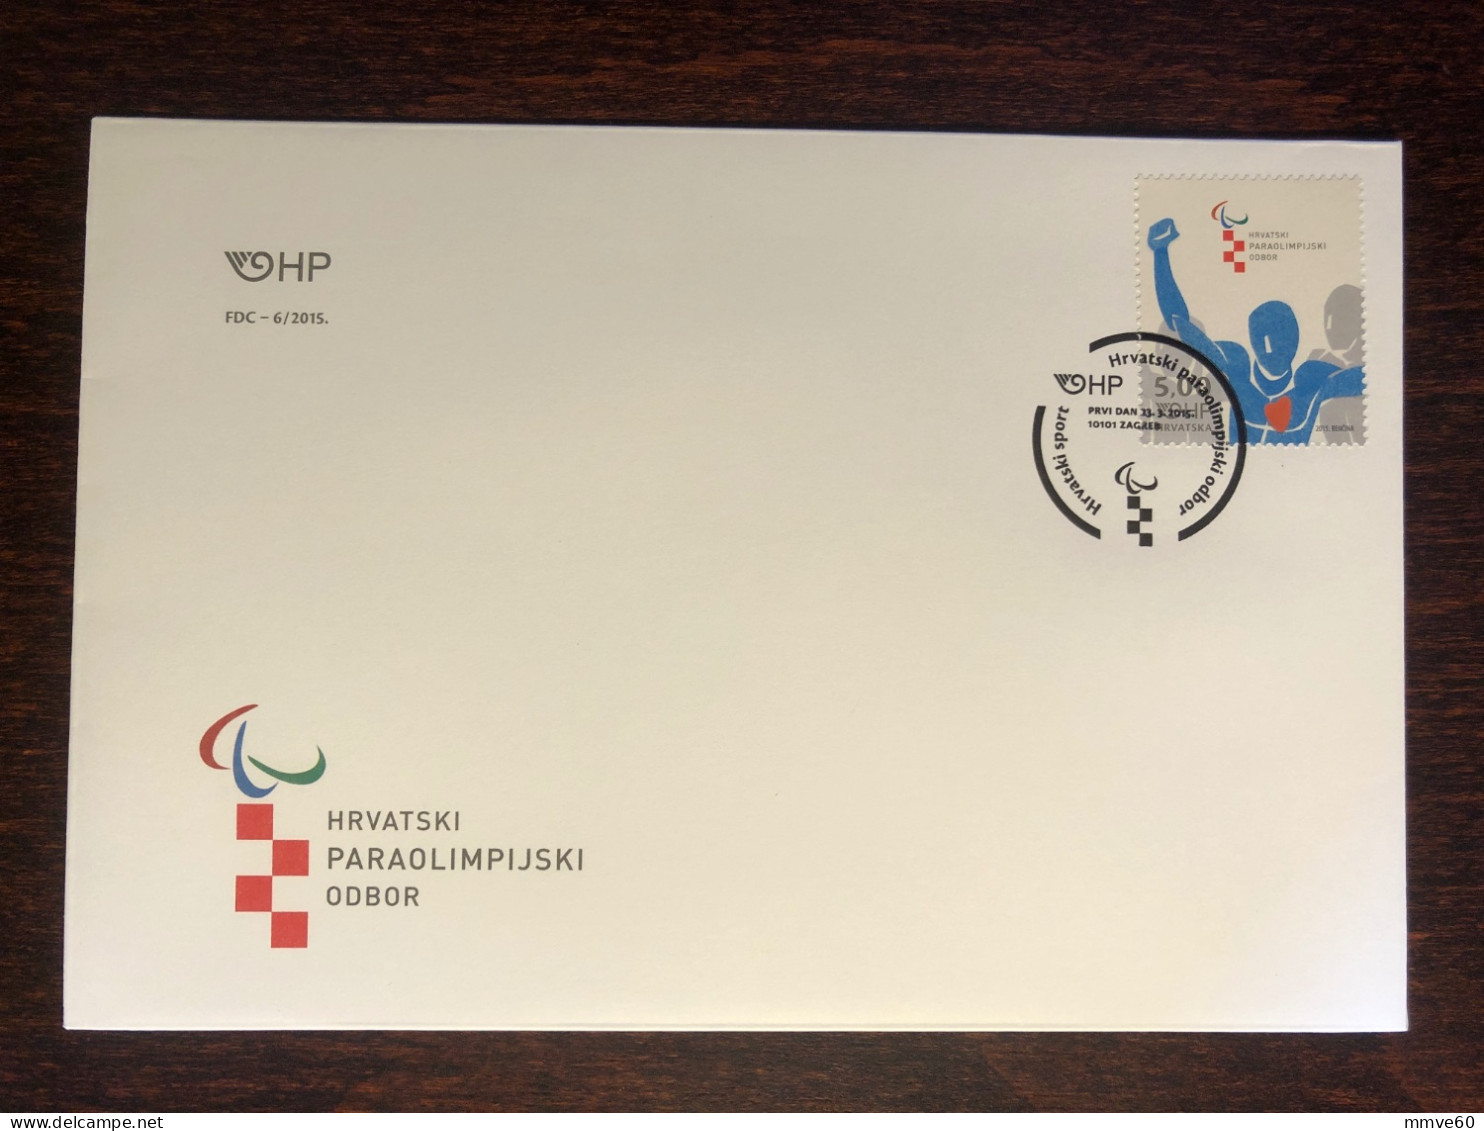 CROATIA FDC COVER 2015 YEAR PARALYMPIC DISABLED SPORTS HEALTH MEDICINE STAMPS - Kroatië